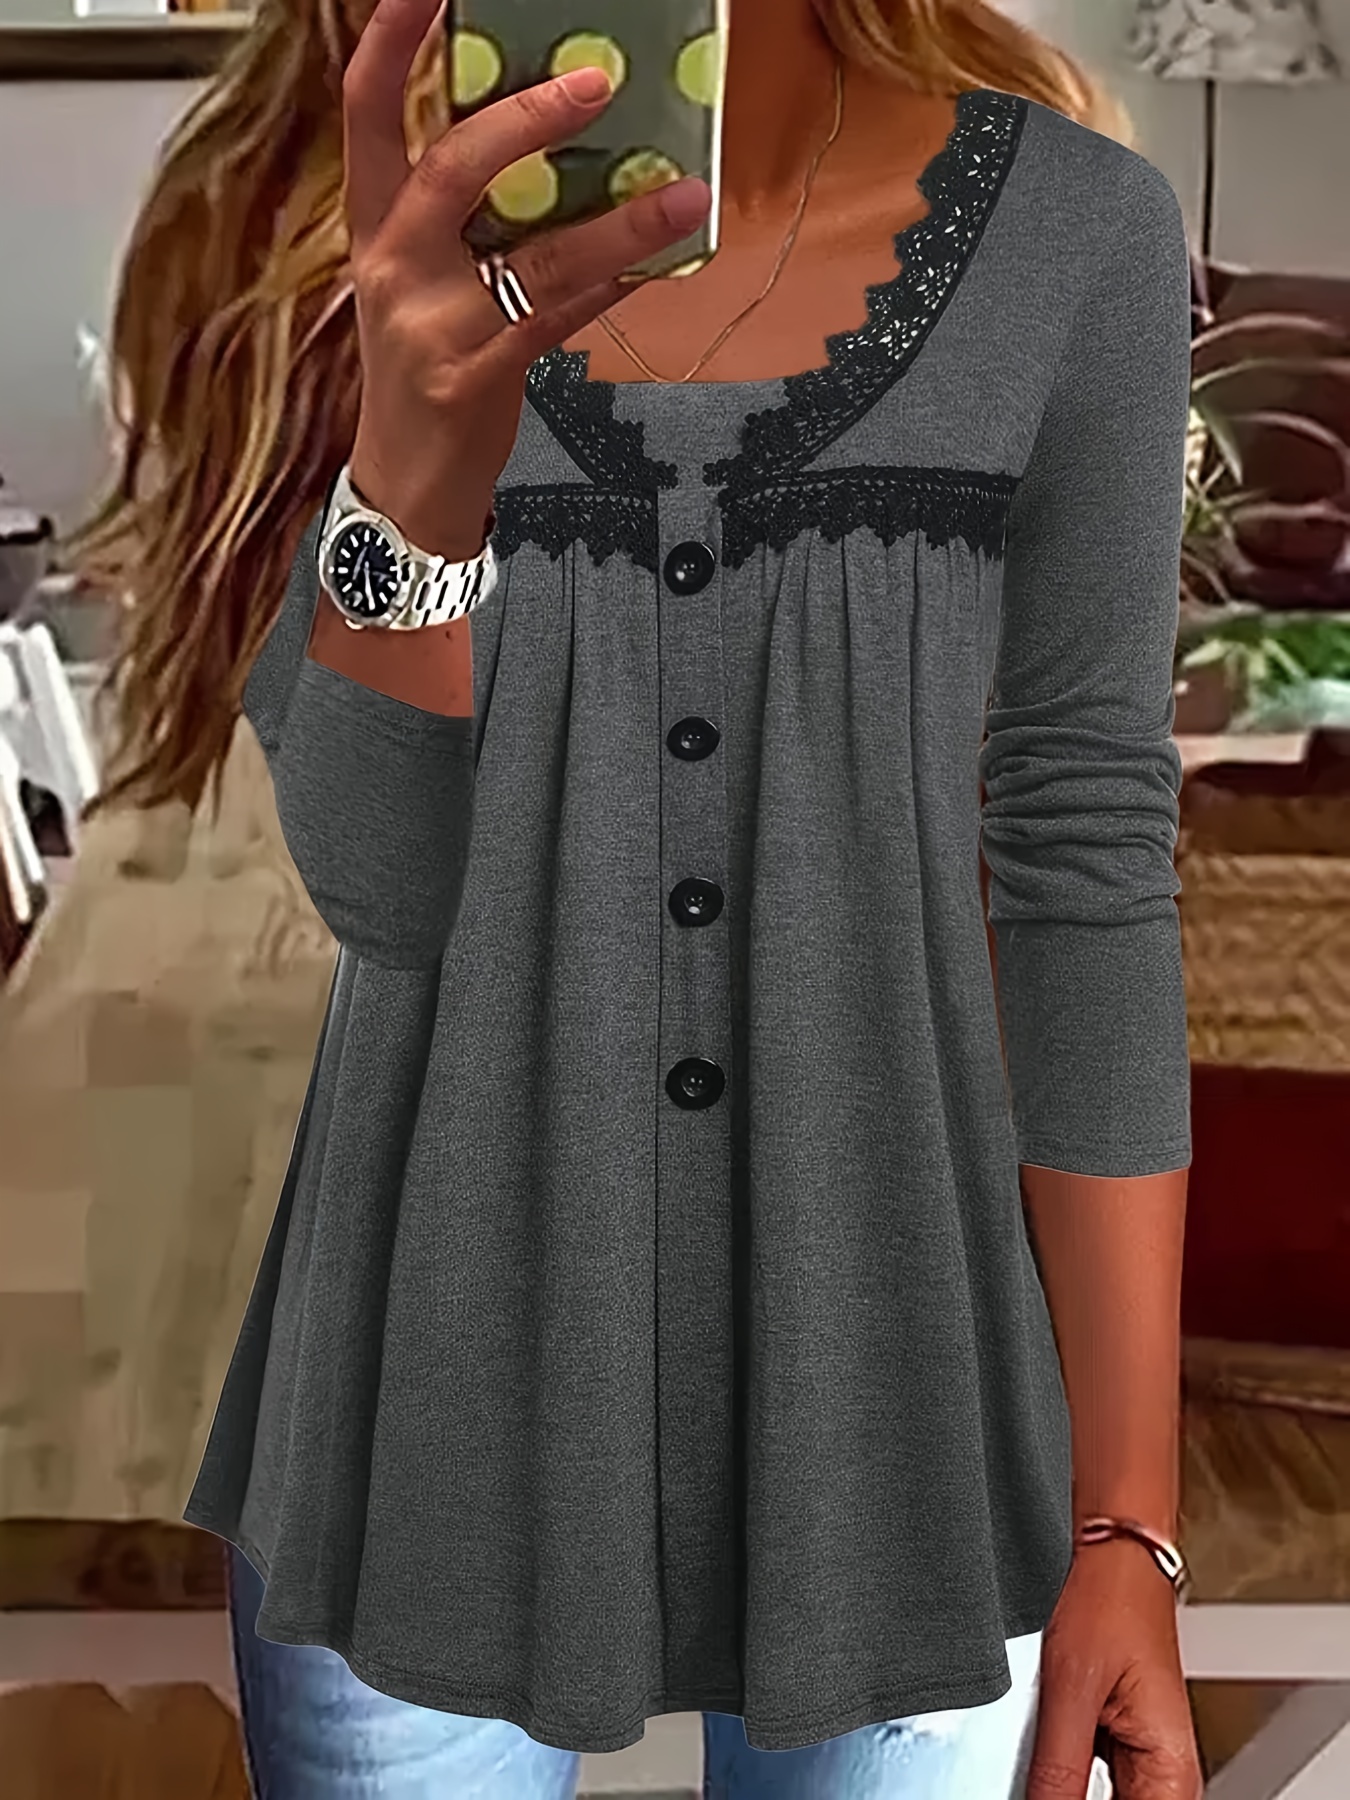 Fall 2020 Long Sleeve Fashion Women V Neck Tops And Blouses Blusas